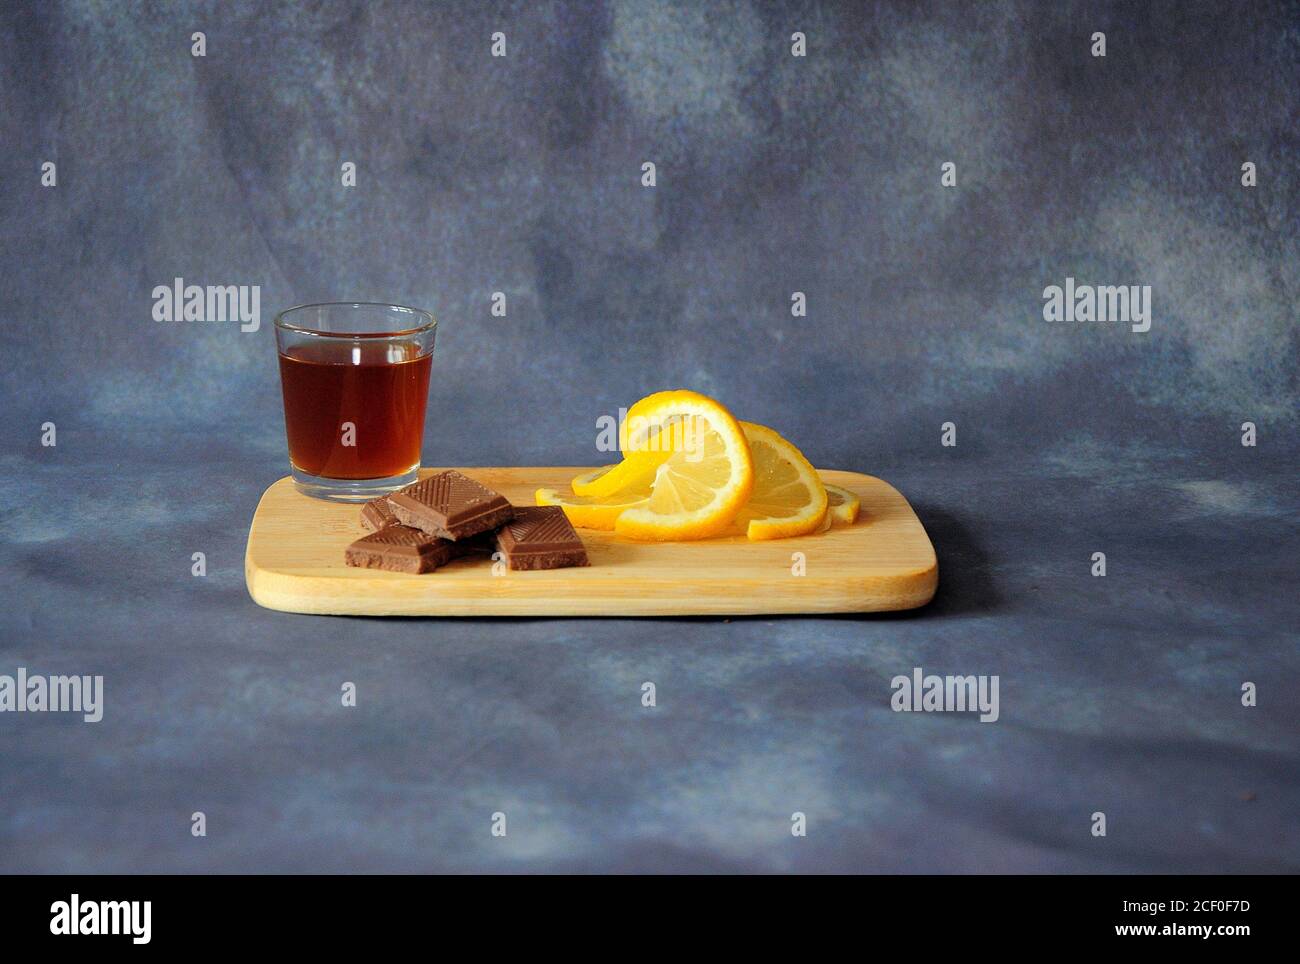 A glass of cognac, pieces of chocolate and lemon wedges lie on a wooden board on a gray background. Close-up. Stock Photo